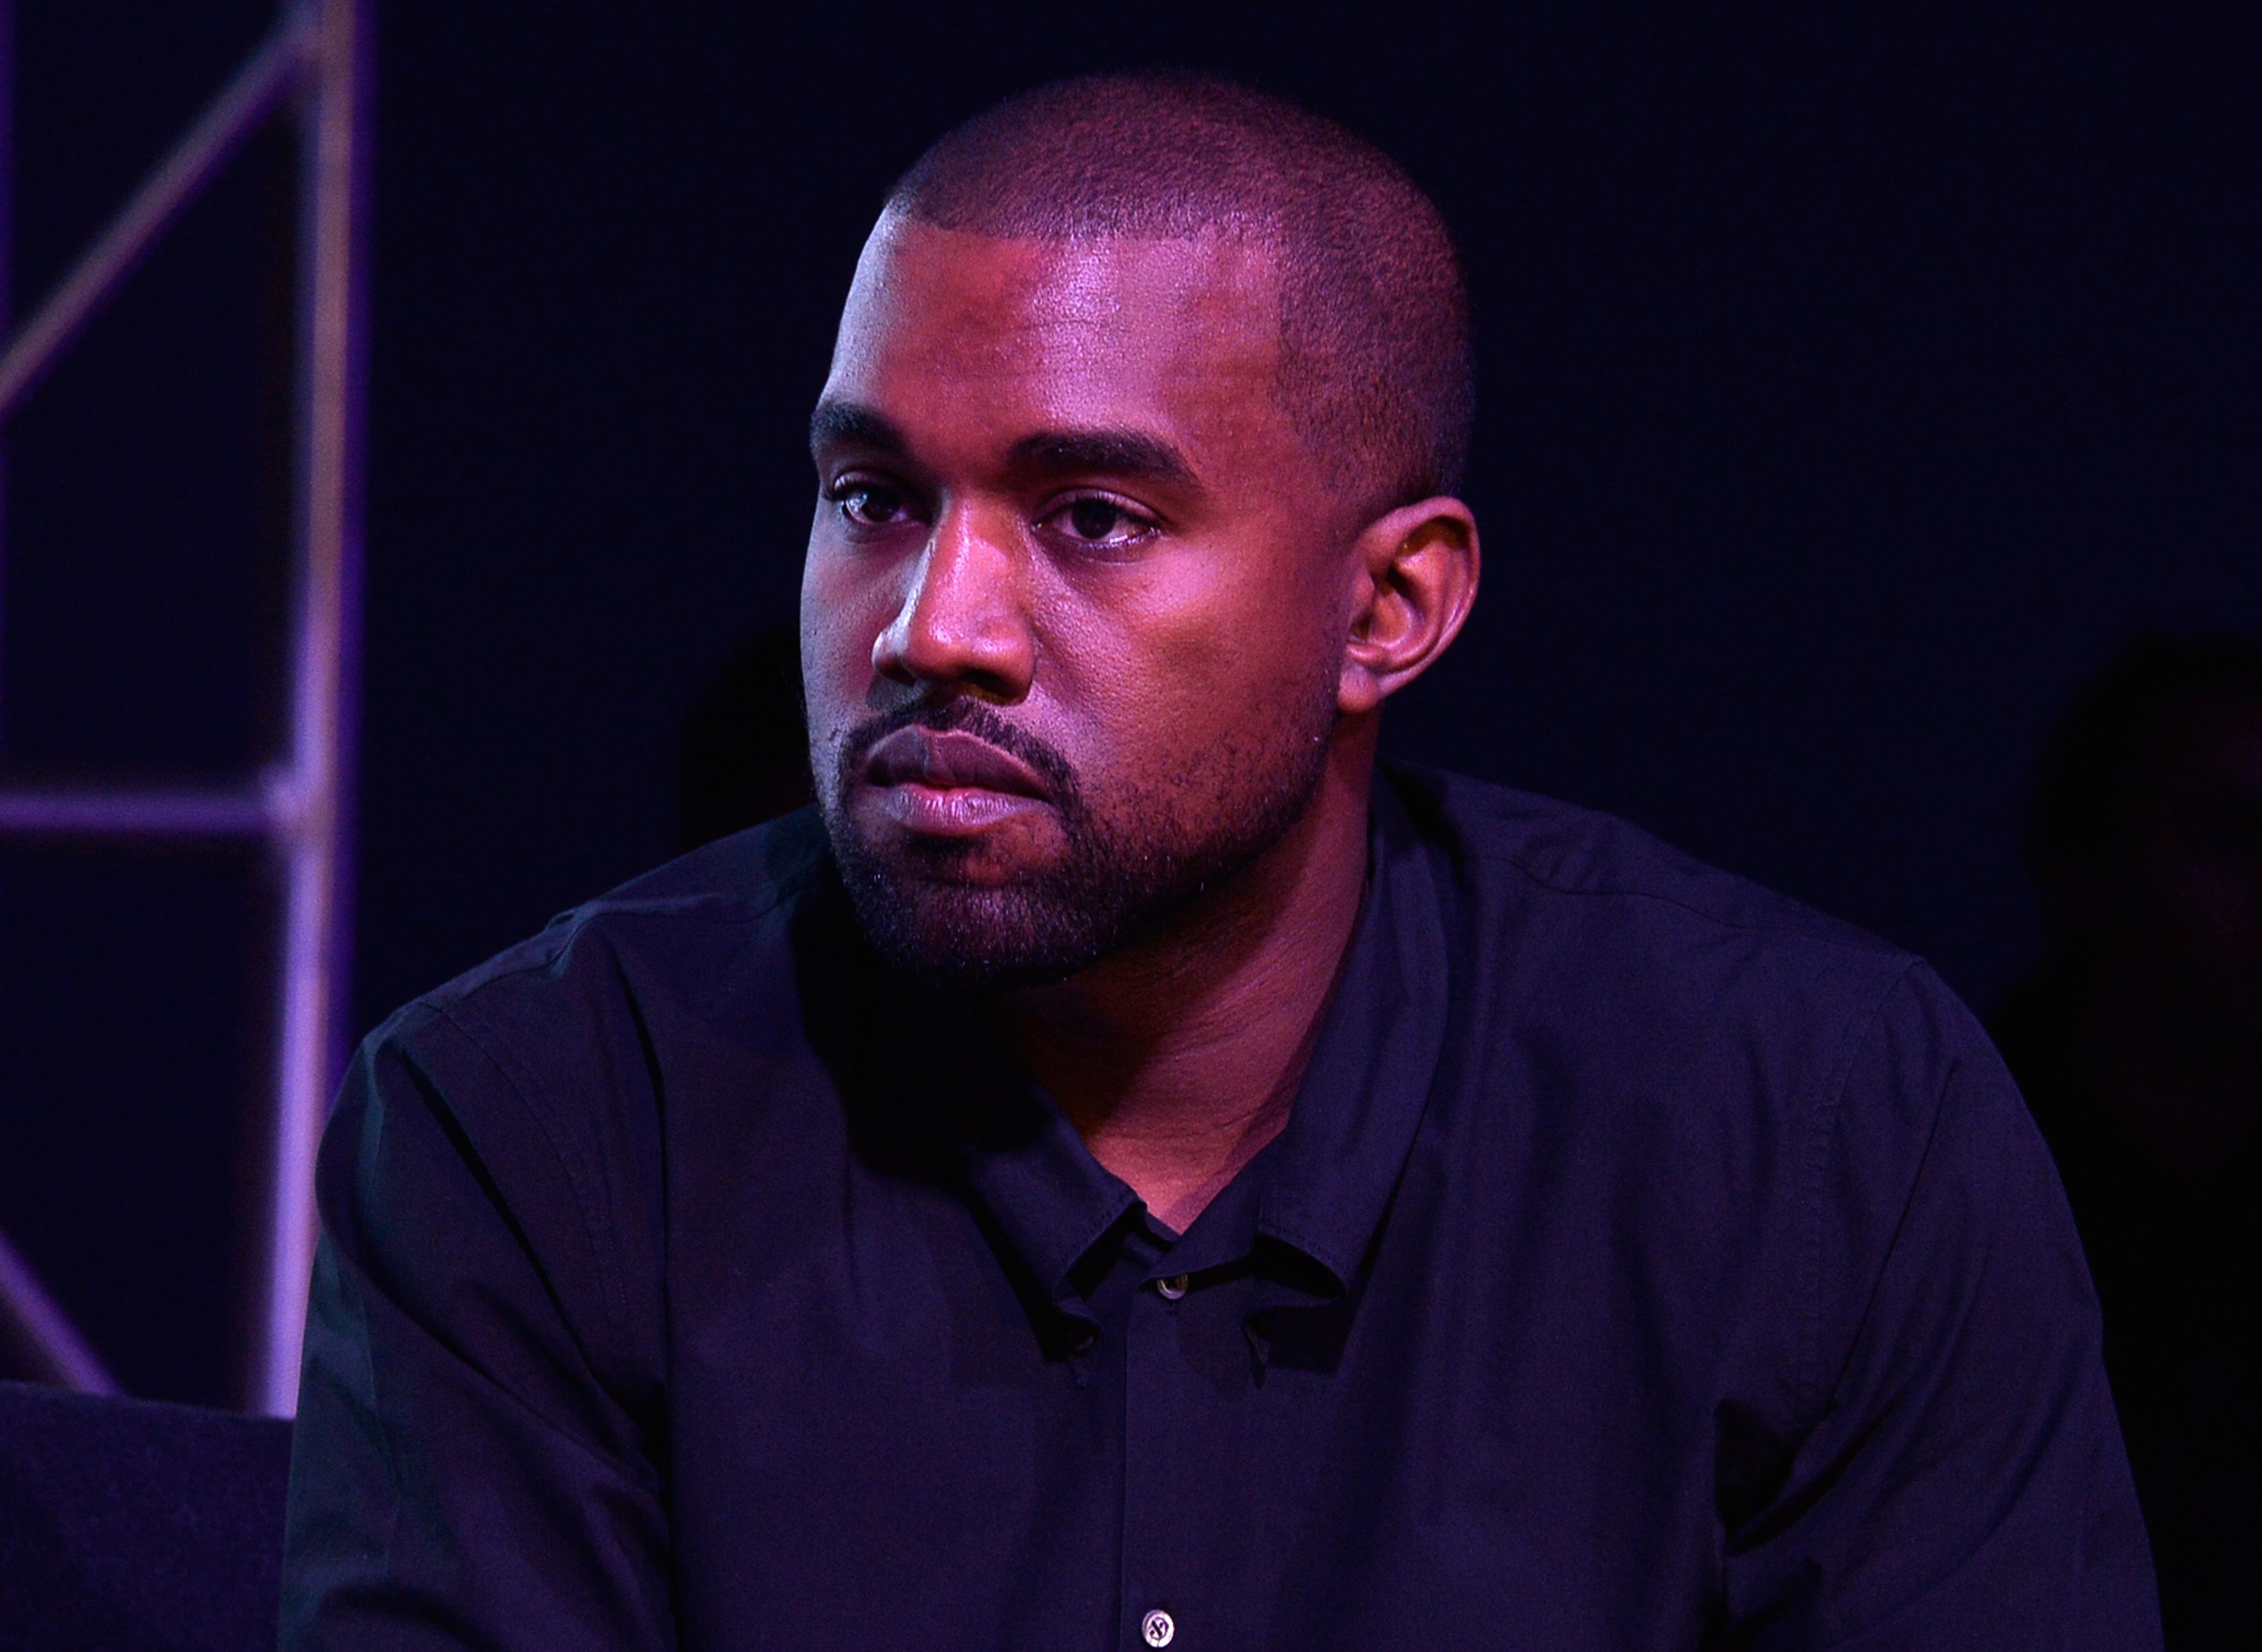 Kanye West wearing a collared shirt